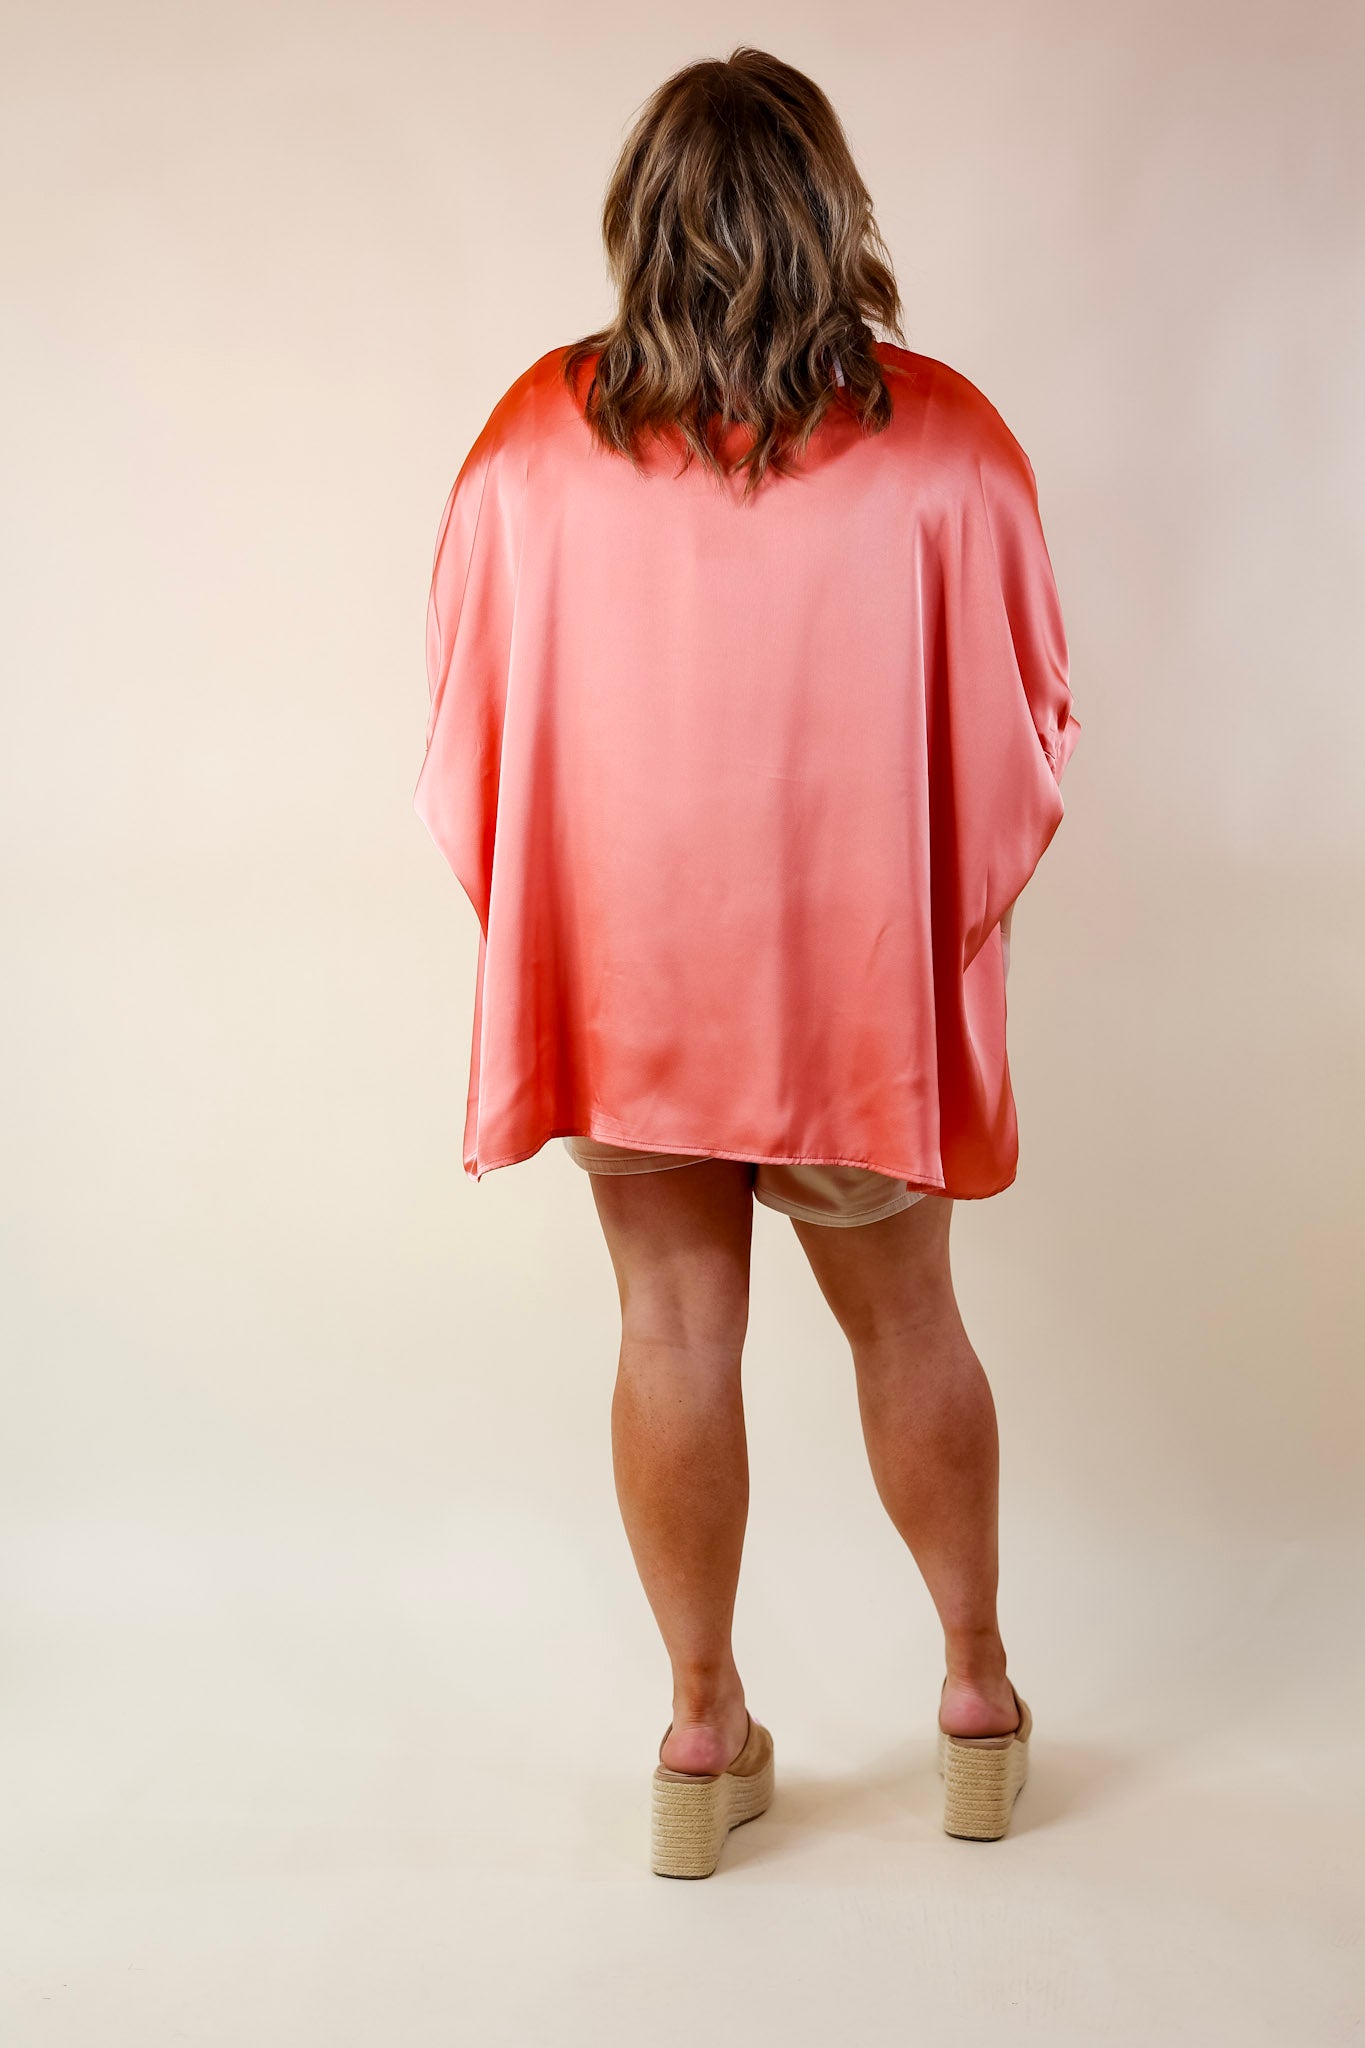 Irresistibly Chic Half Sleeve Oversized Blouse in Coral Orange - Giddy Up Glamour Boutique